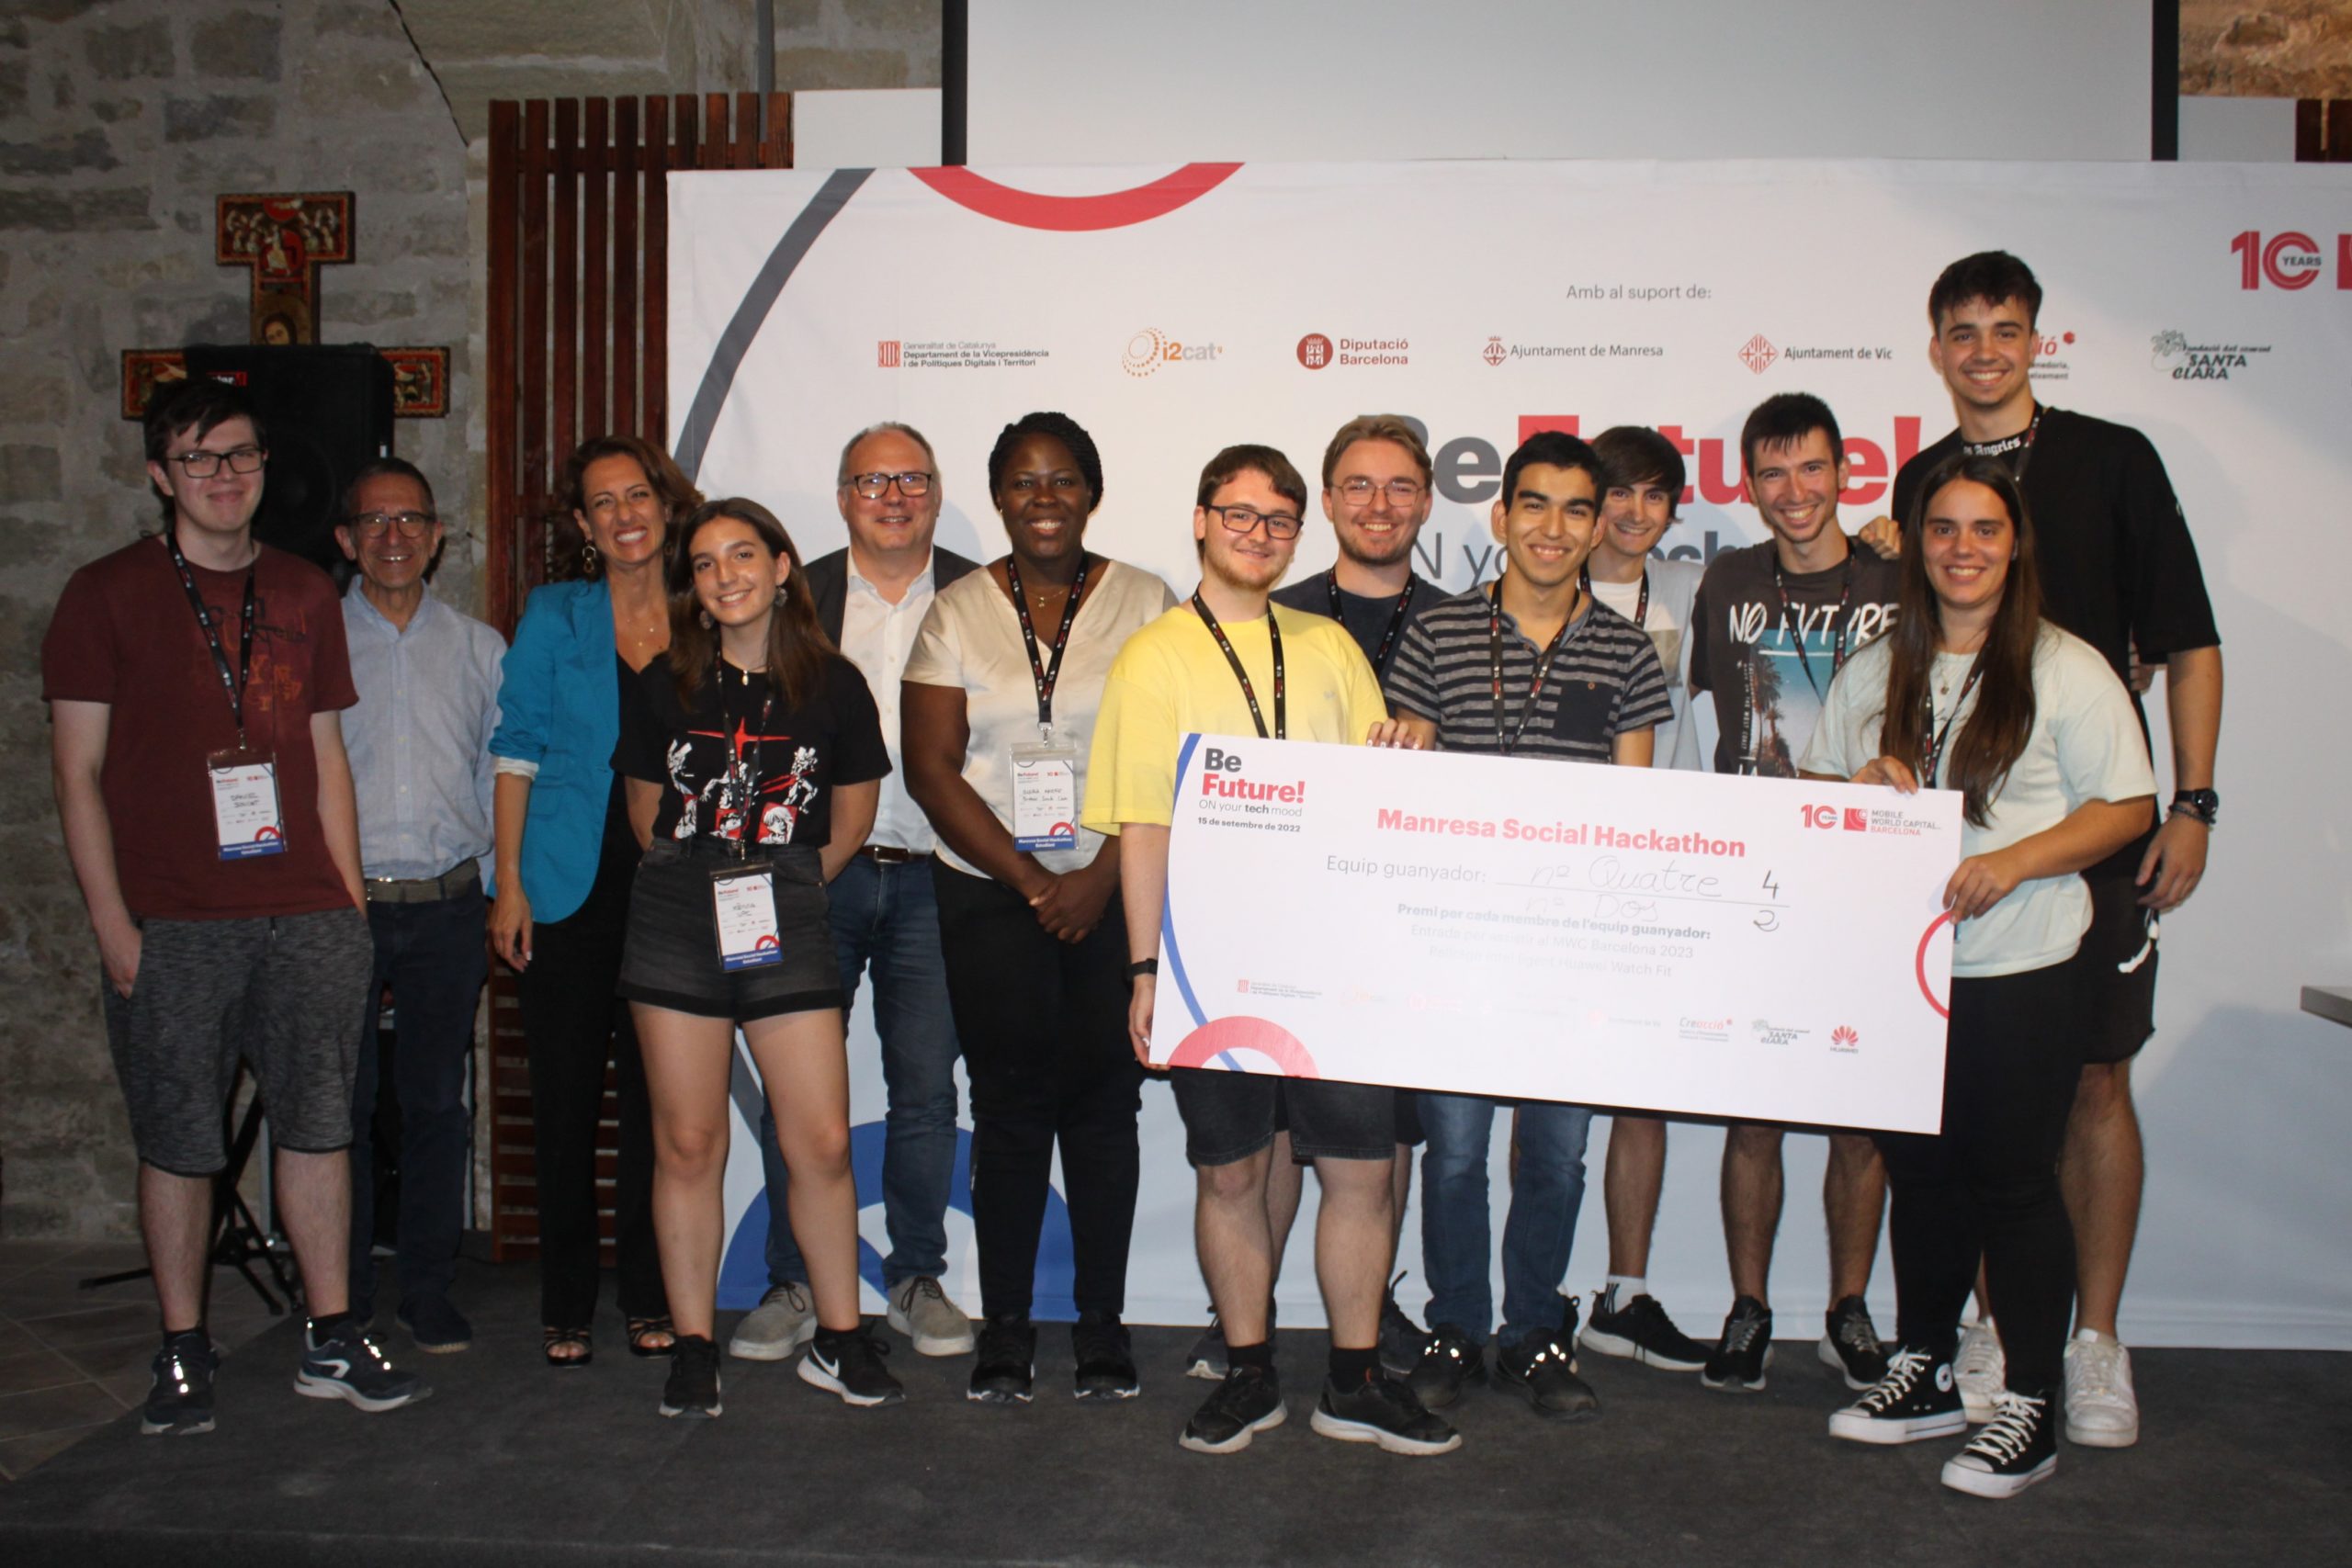 Winners of the ‘Manresa Social Hackathon’ awarded €1,500 to develop their solutions